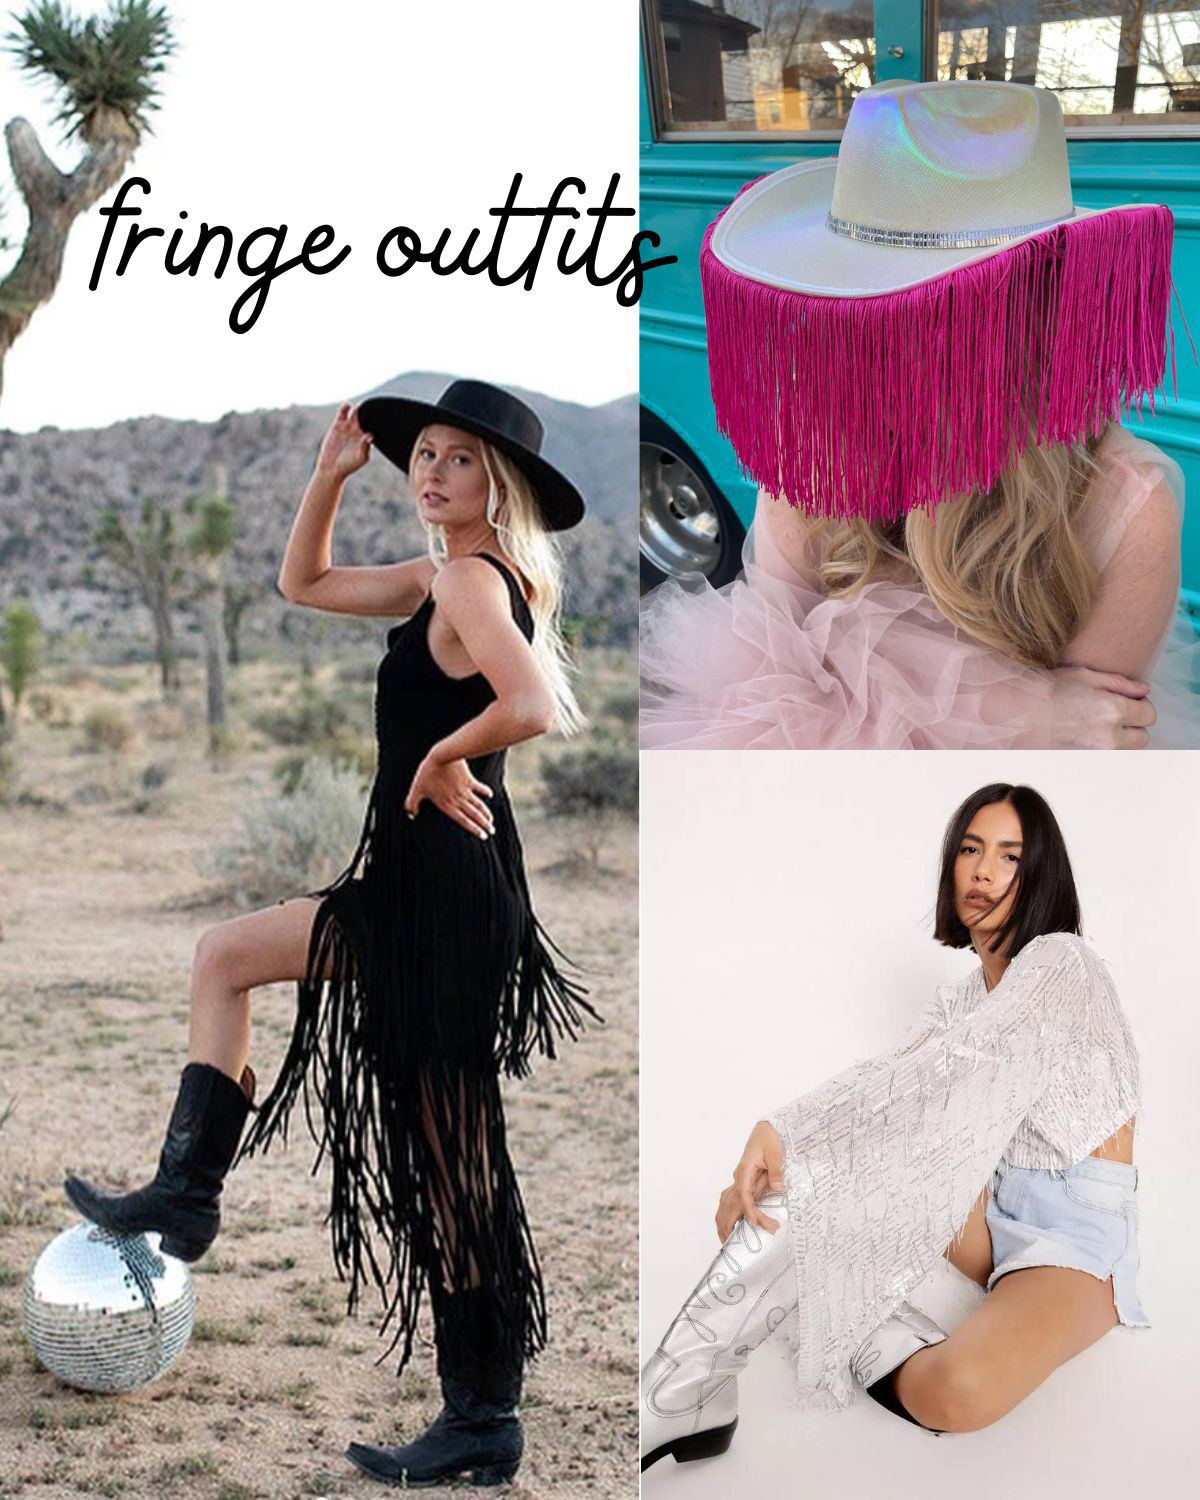 Girls in fringe dresses and tops, and a fringe cowboy hat